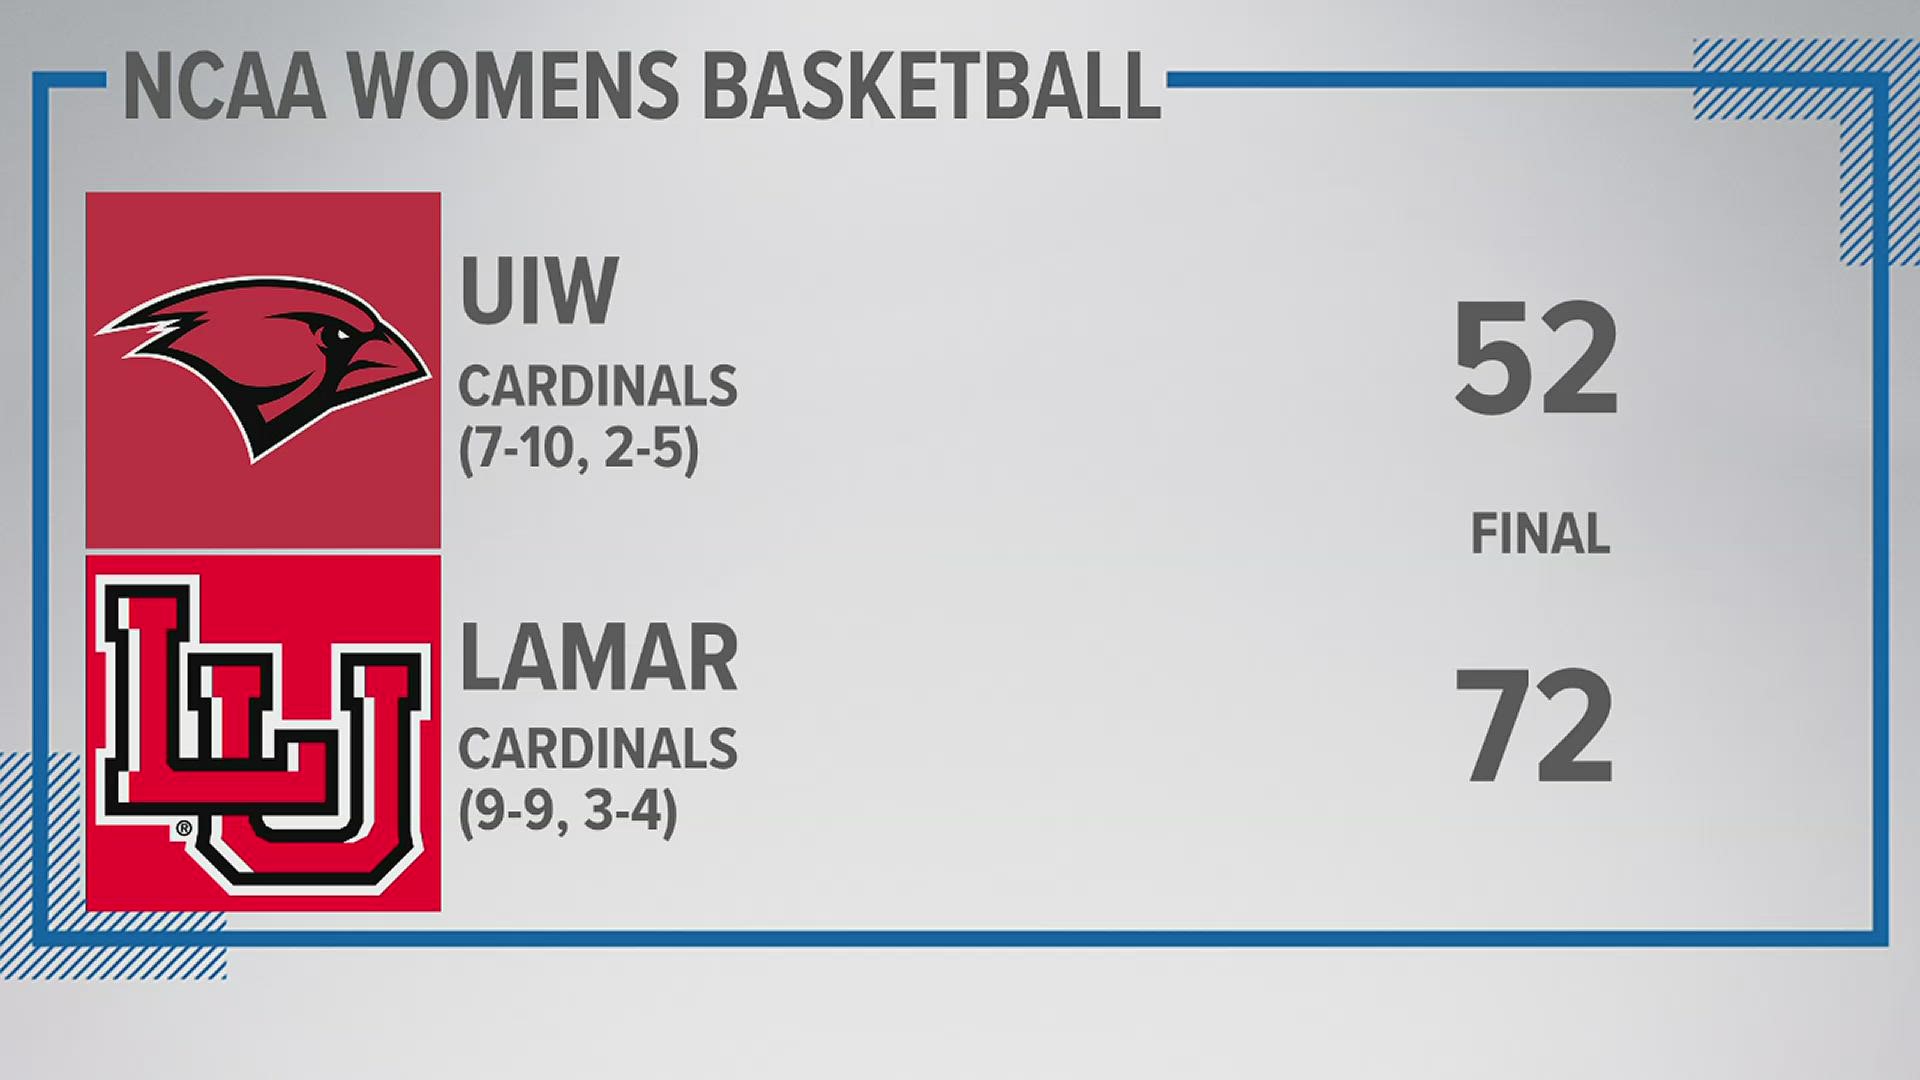 Lamar University’s women’s basketball, in the midst of a three-game skid, found themselves trailing 21-10 in the second quarter.